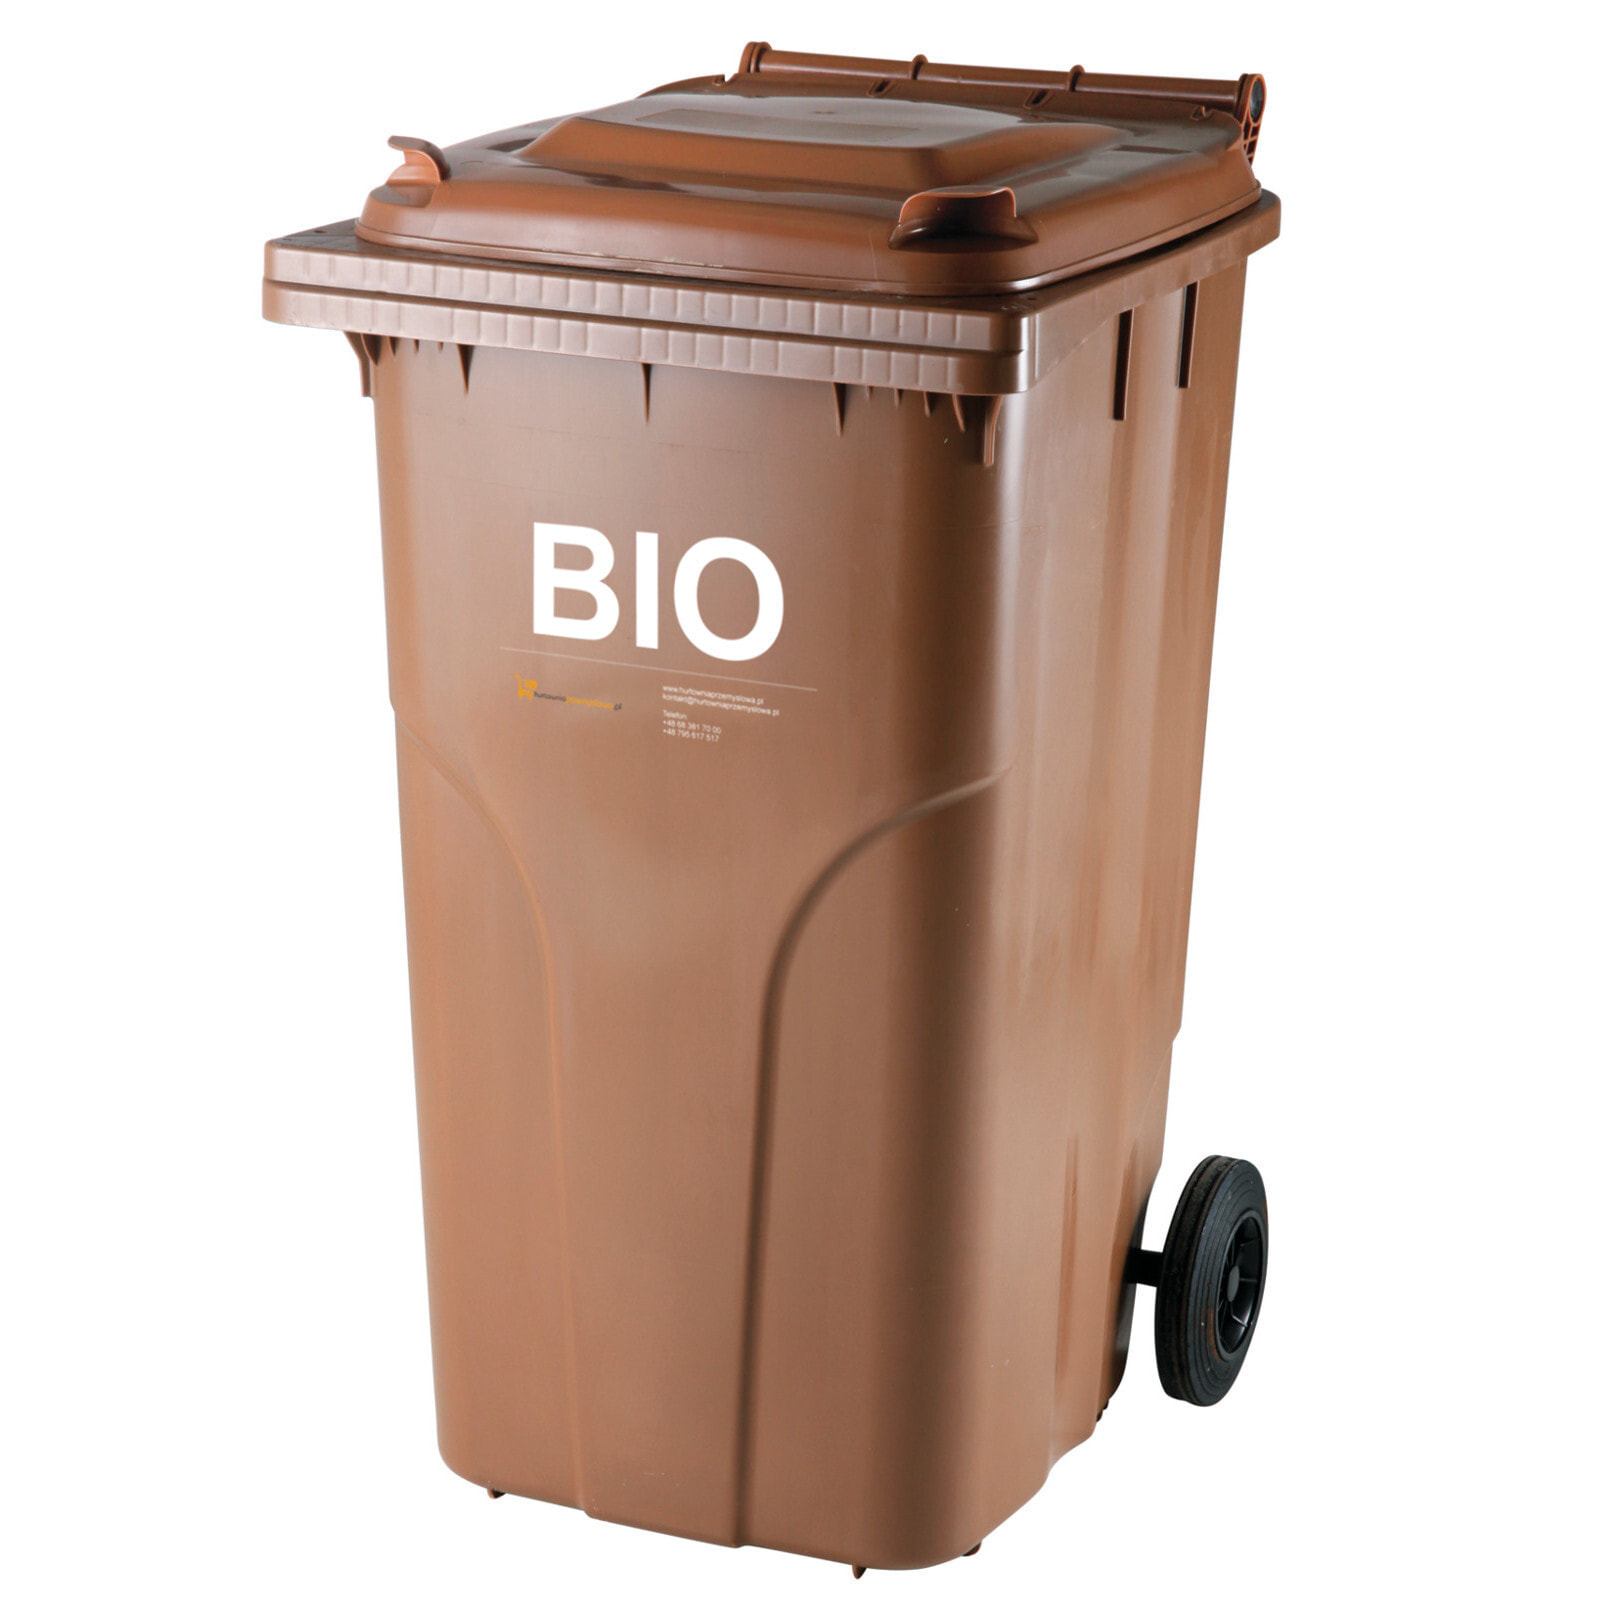 BIO bucket container for food waste and rubbish ATESTS Europlast Austria - brown 240L